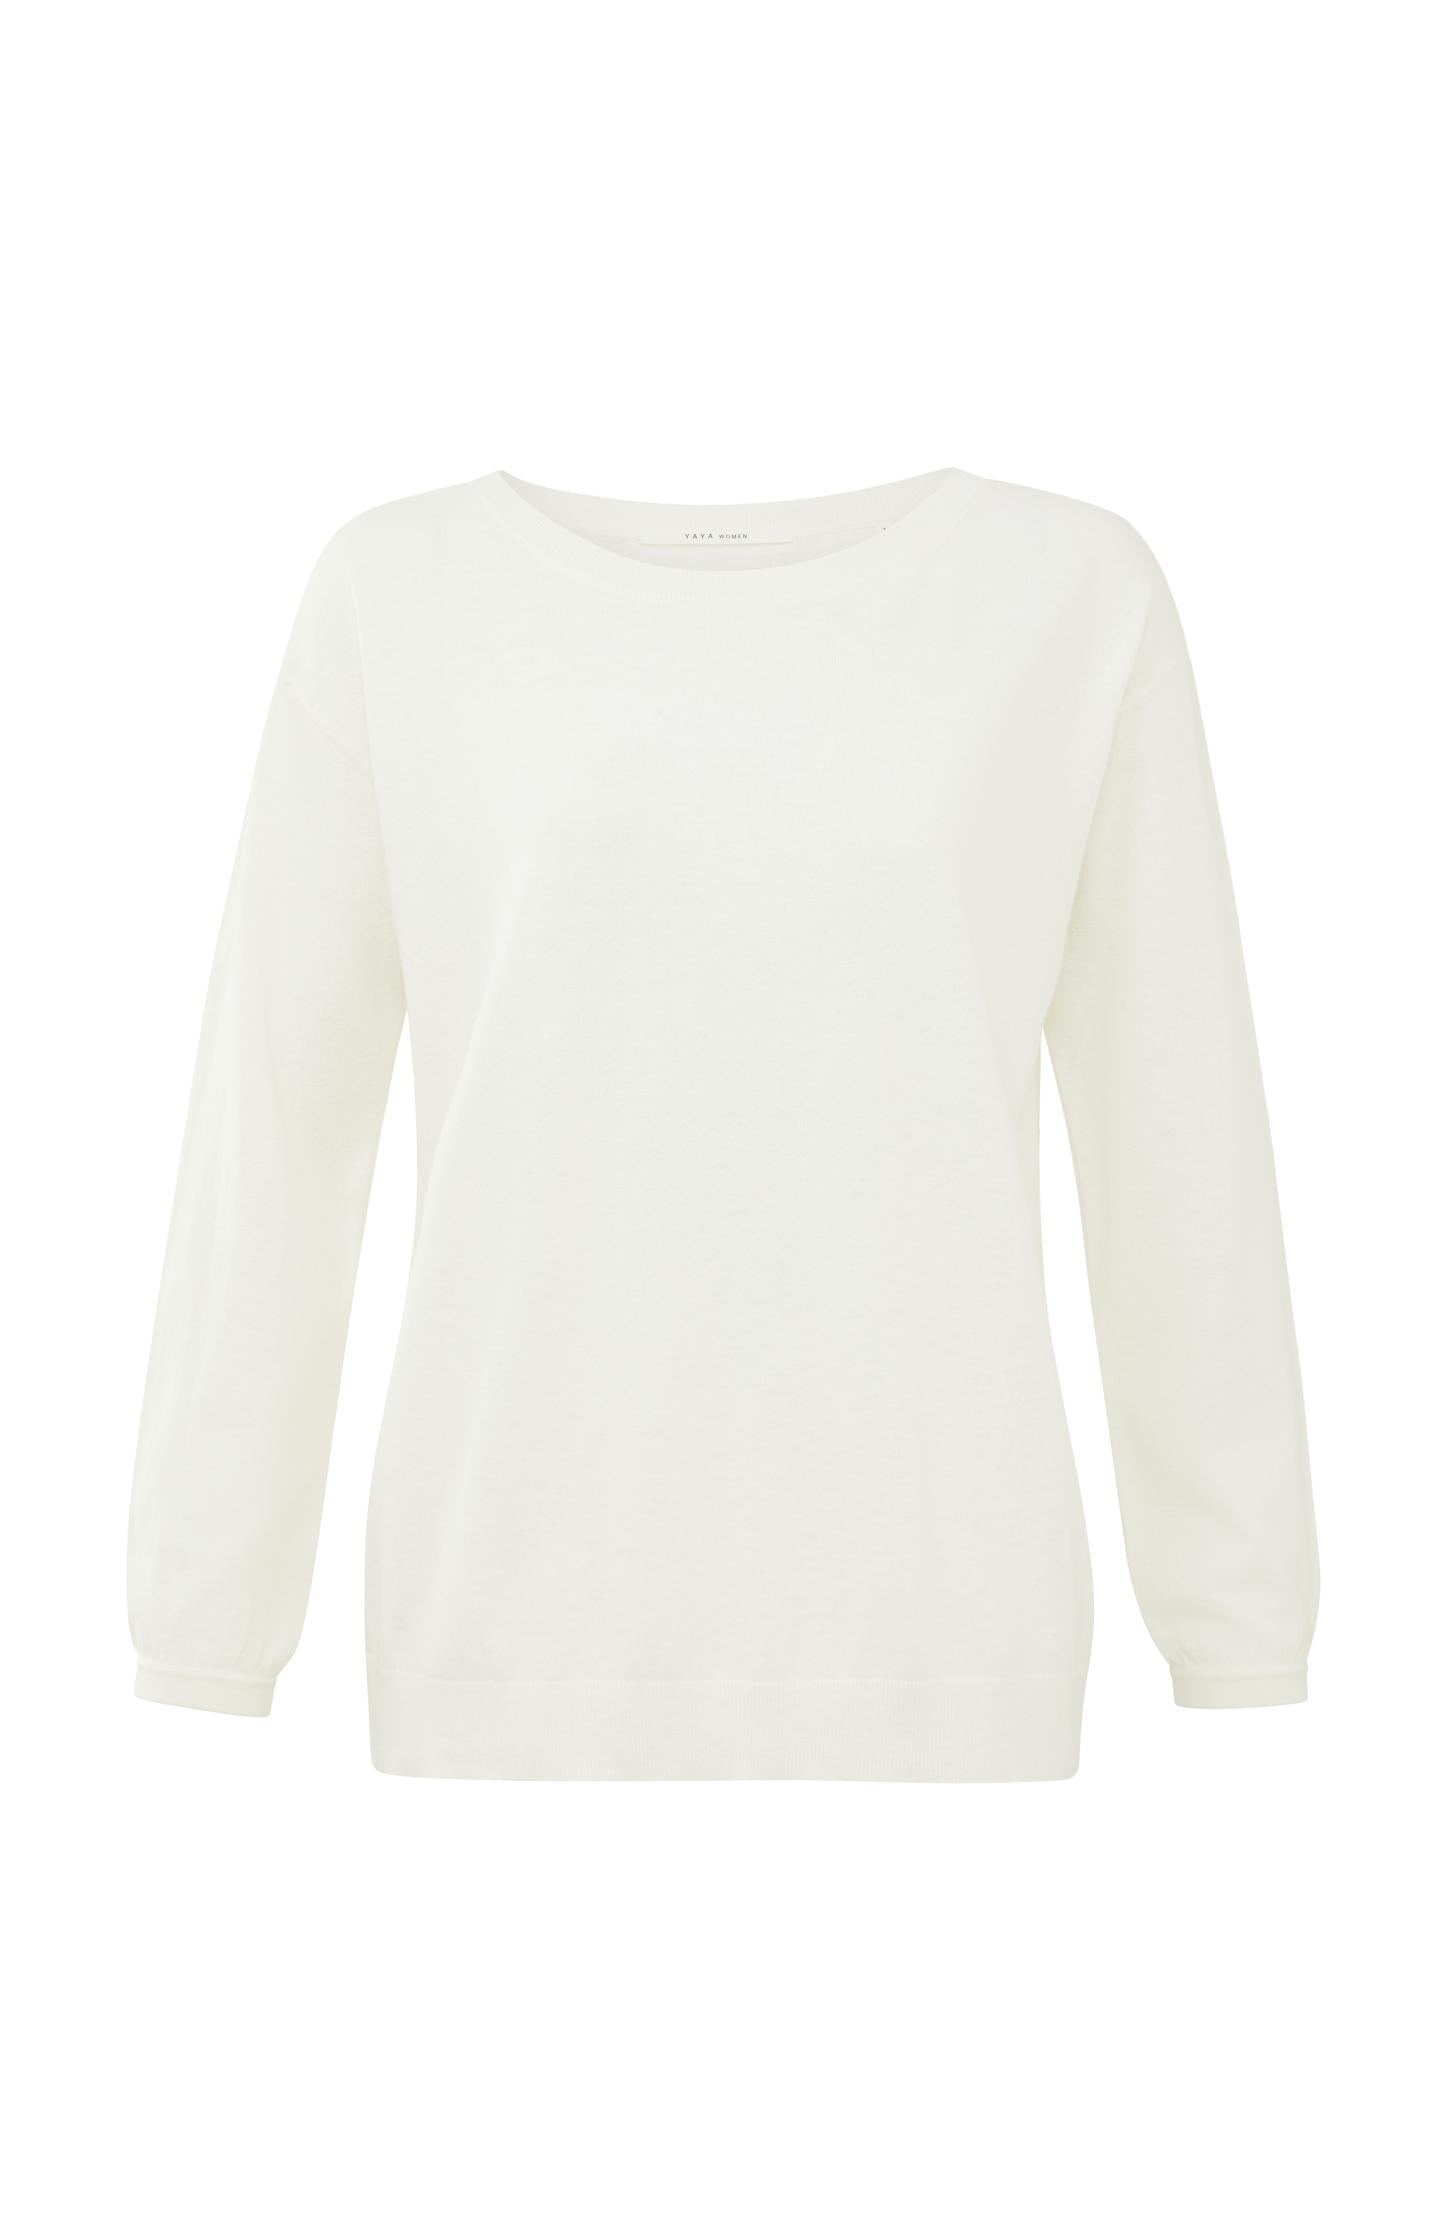 Boatneck sweater with long sleeves and dropped shoulders - Type: product